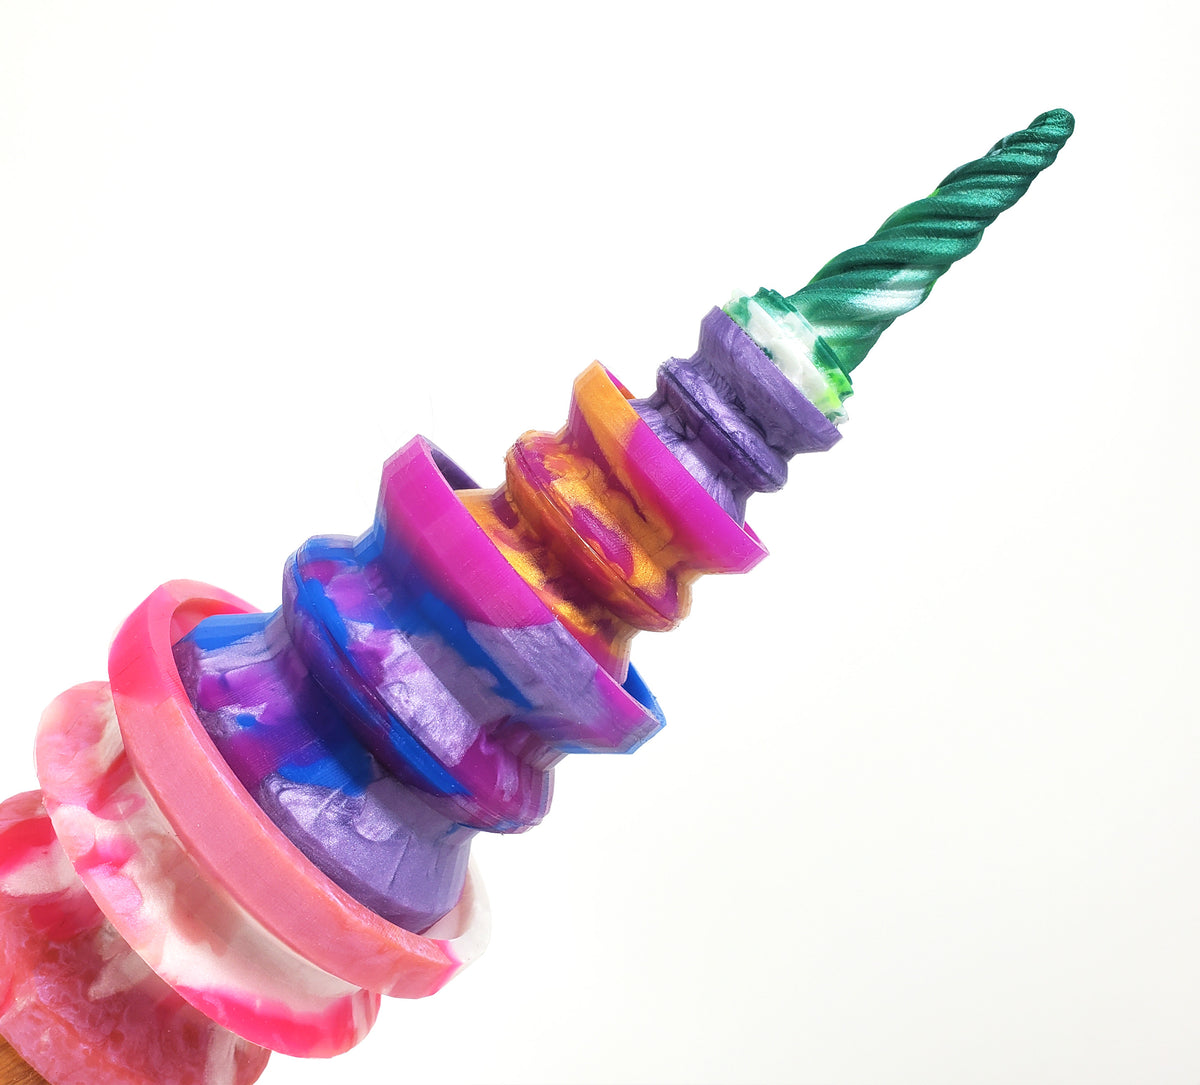 A playful suctioned tower of Double-Sided Suction cups stuck together with a mini suction cup and Unicorn Horn charm at an angle pointing right on a white background